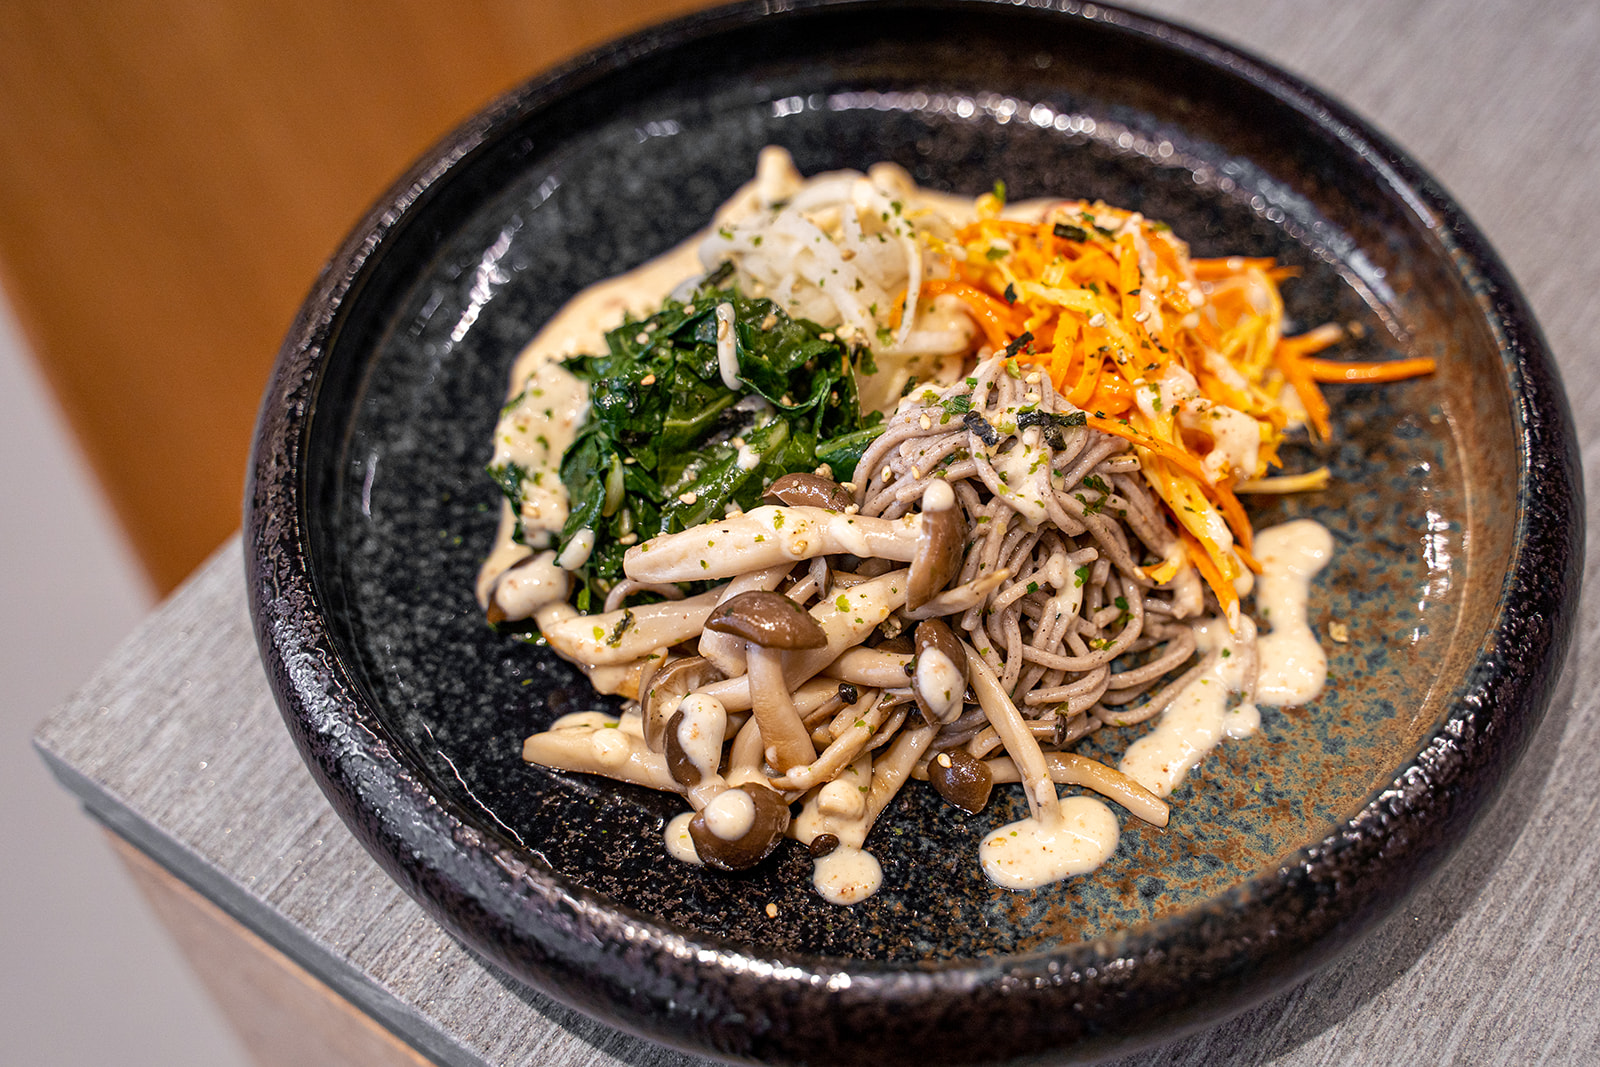 A dish of buckwheat noodles topped with a variety of vegetables.